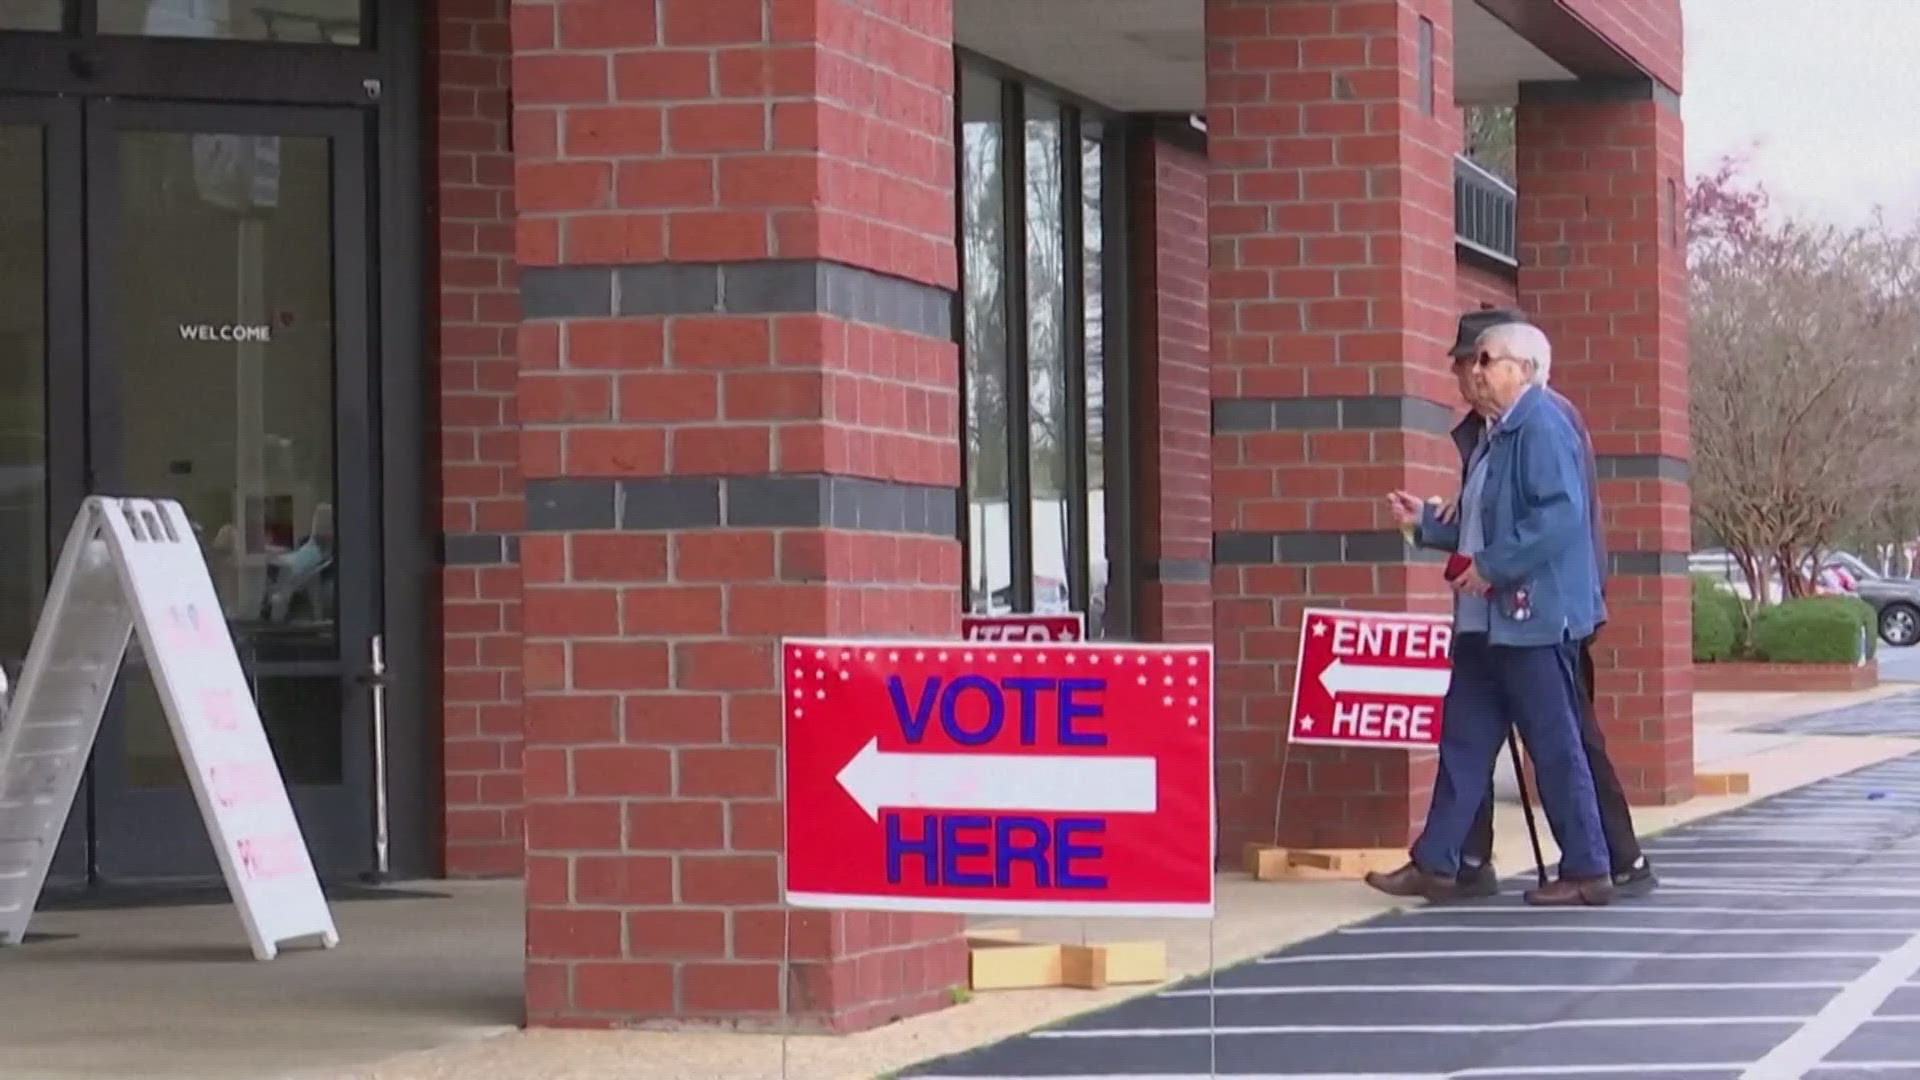 Polls are open until 7 p.m. in Texas for Super Tuesday.